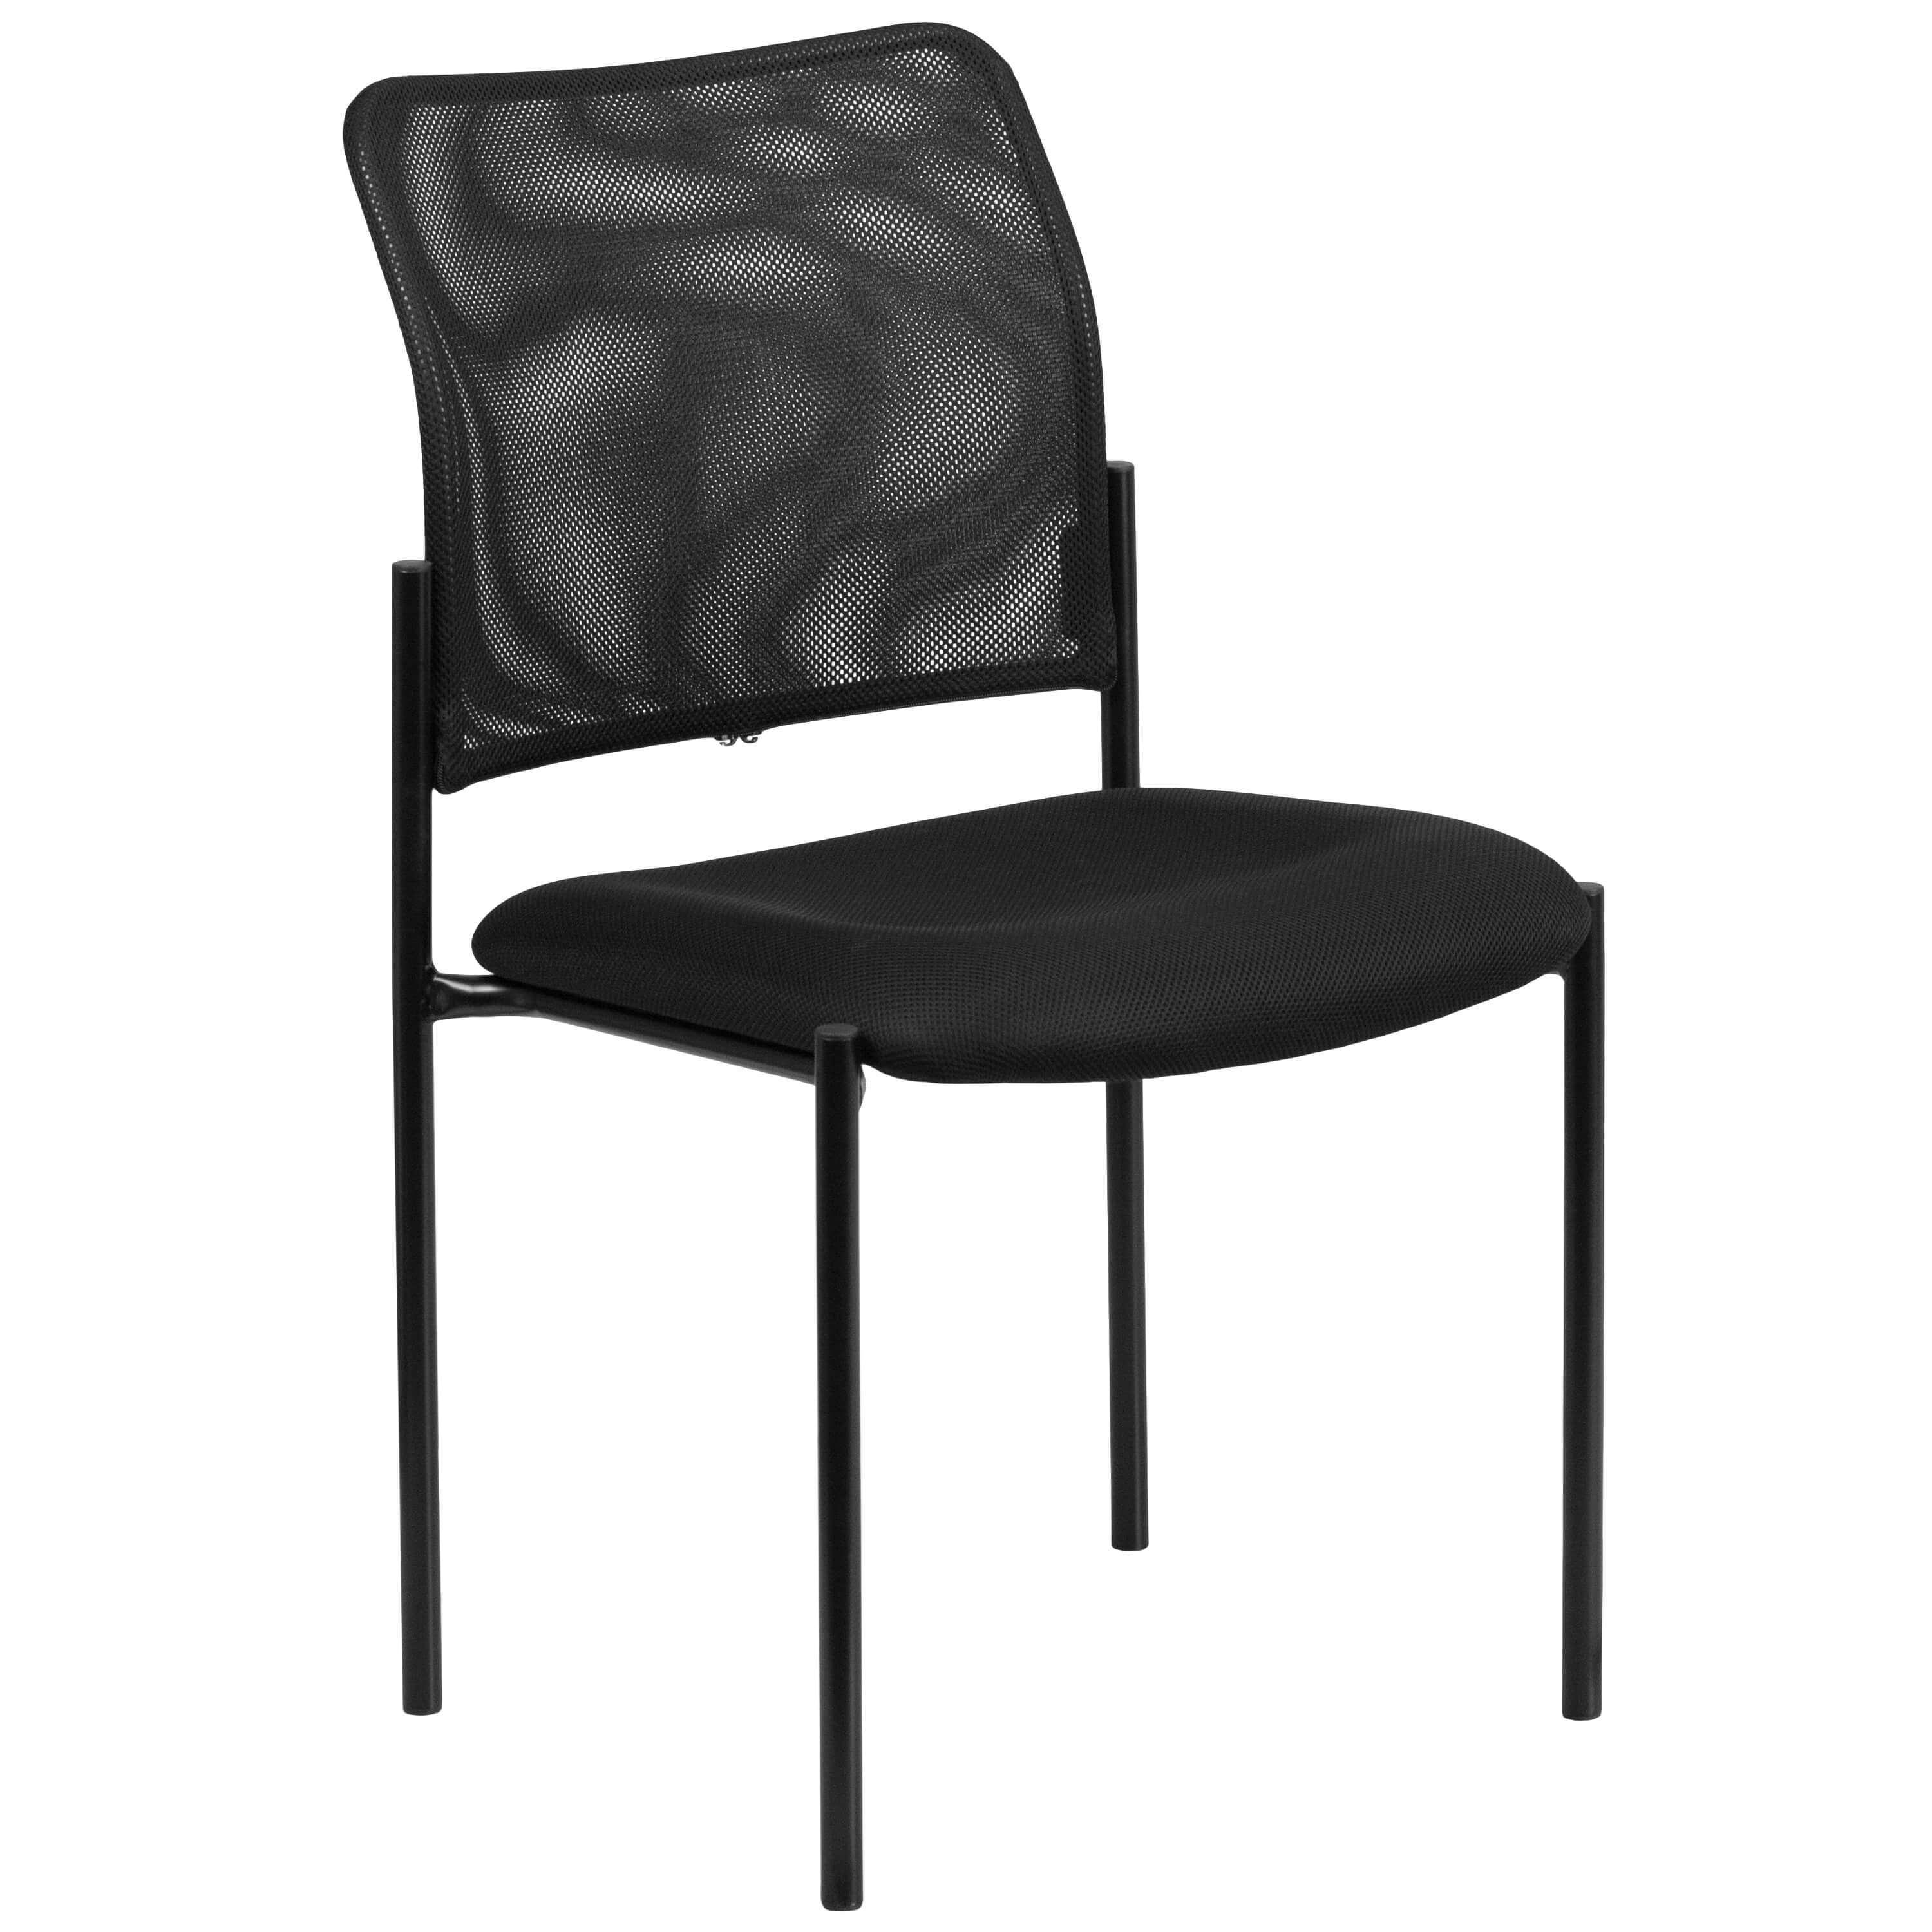 Stackable chairs CUB GO 515 2 GG FLA